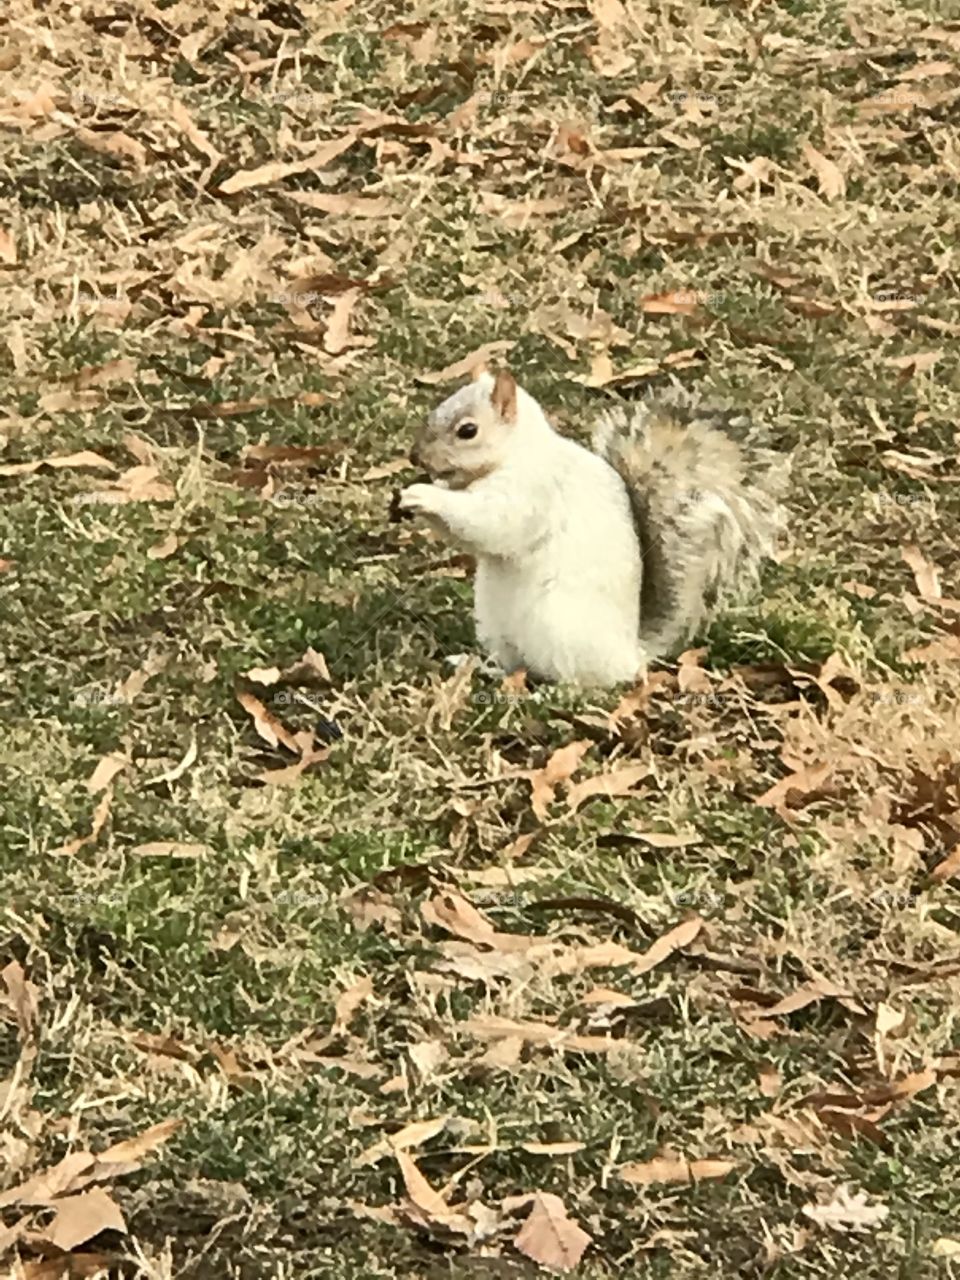 White squirrel in D.C. near the capital